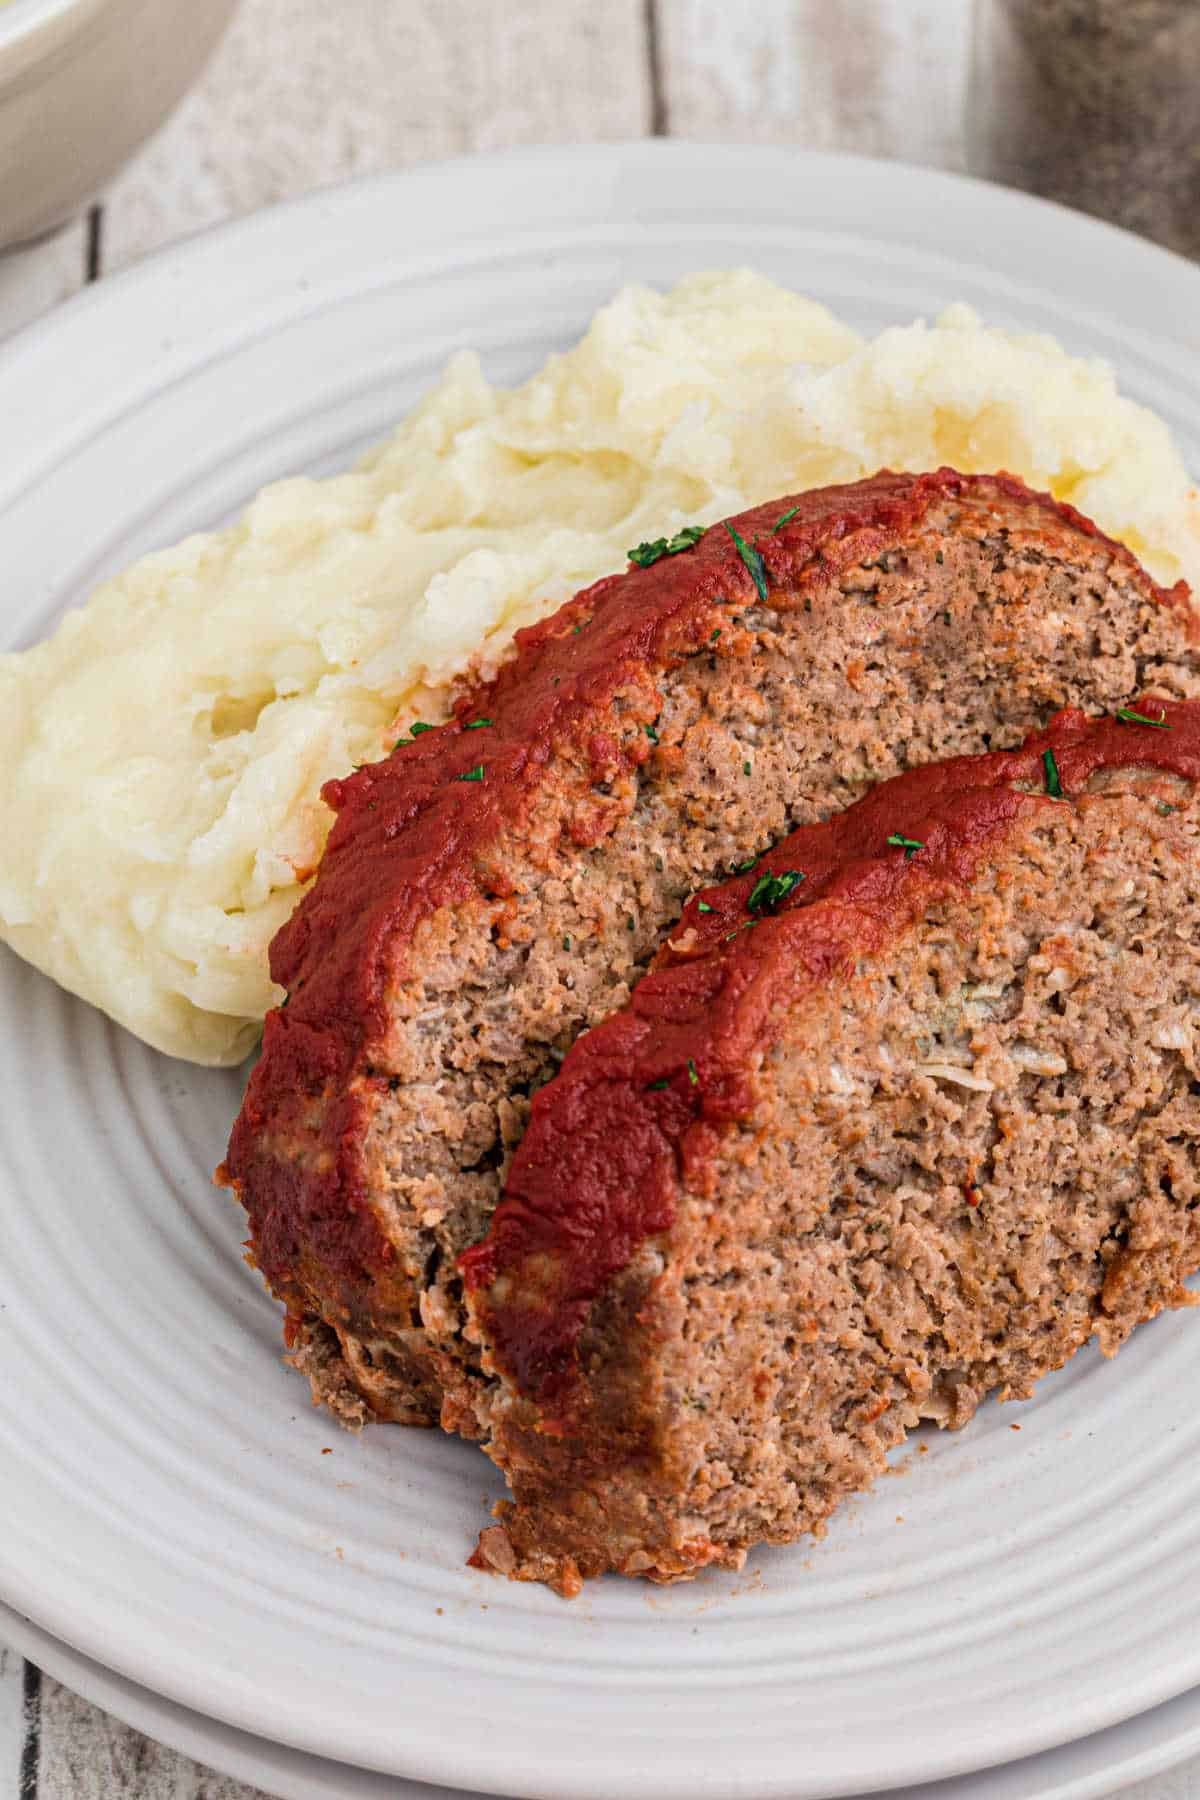 Two slices of meatloaf against some mashed potatoes.